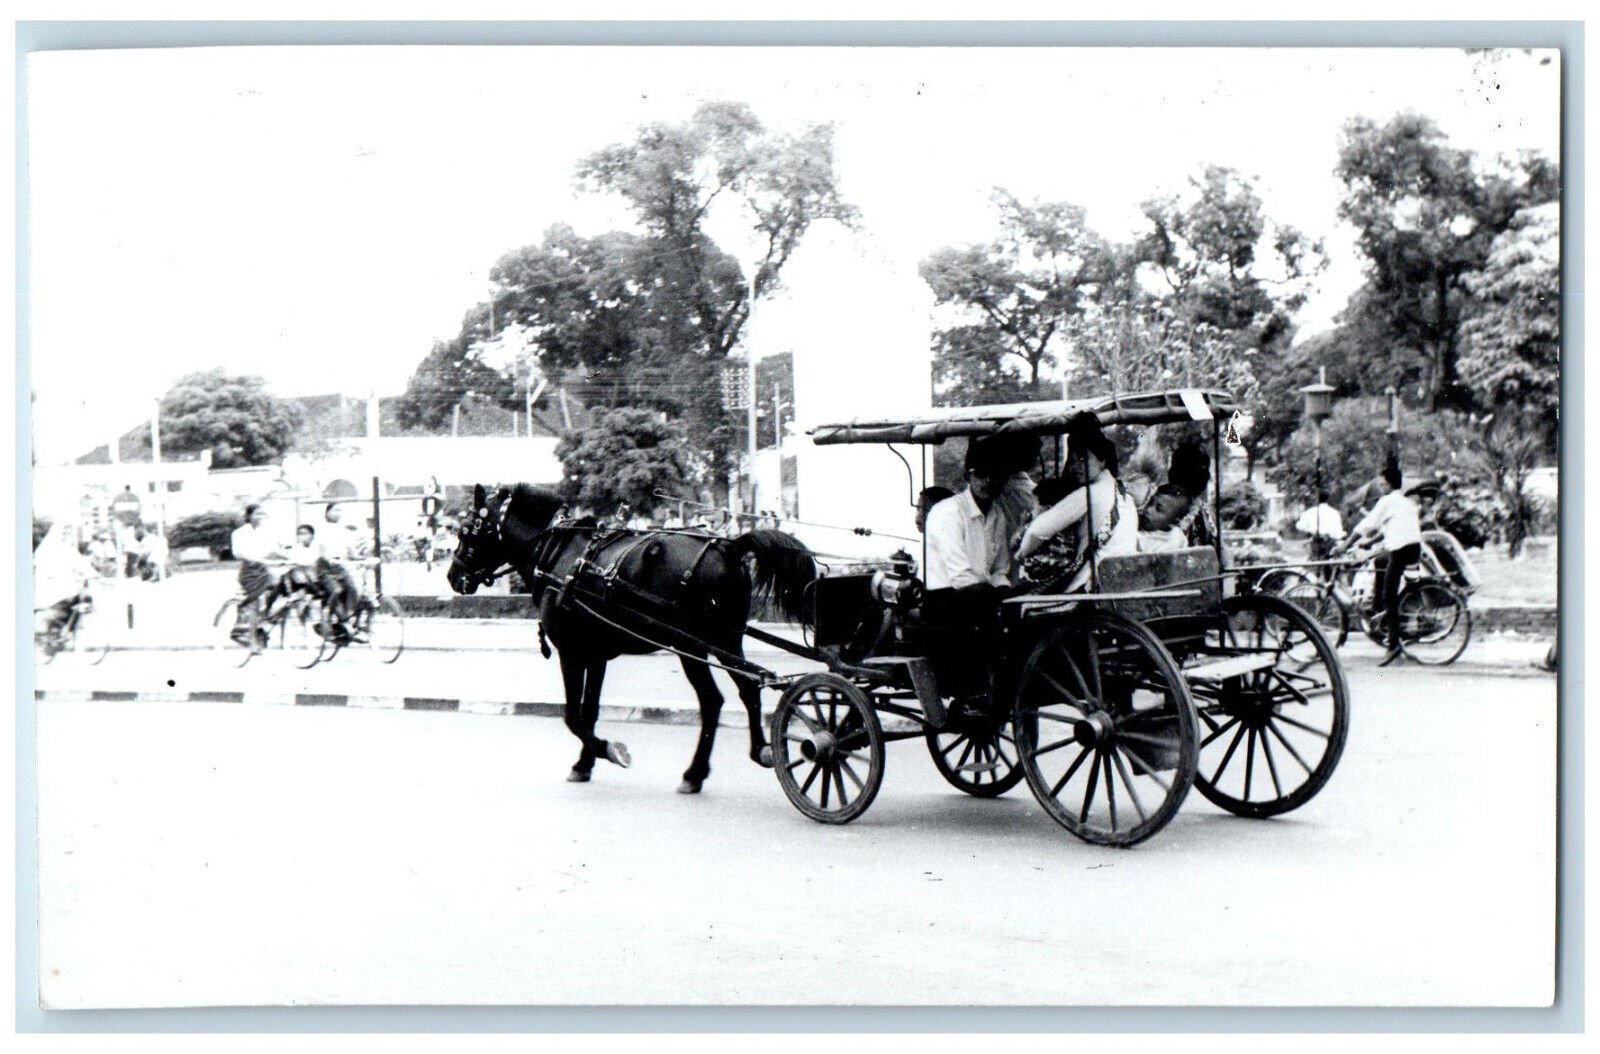 Jogjakarta Indonesia Postcard Andong Carriage Old Vehicle c1940's RPPC Photo